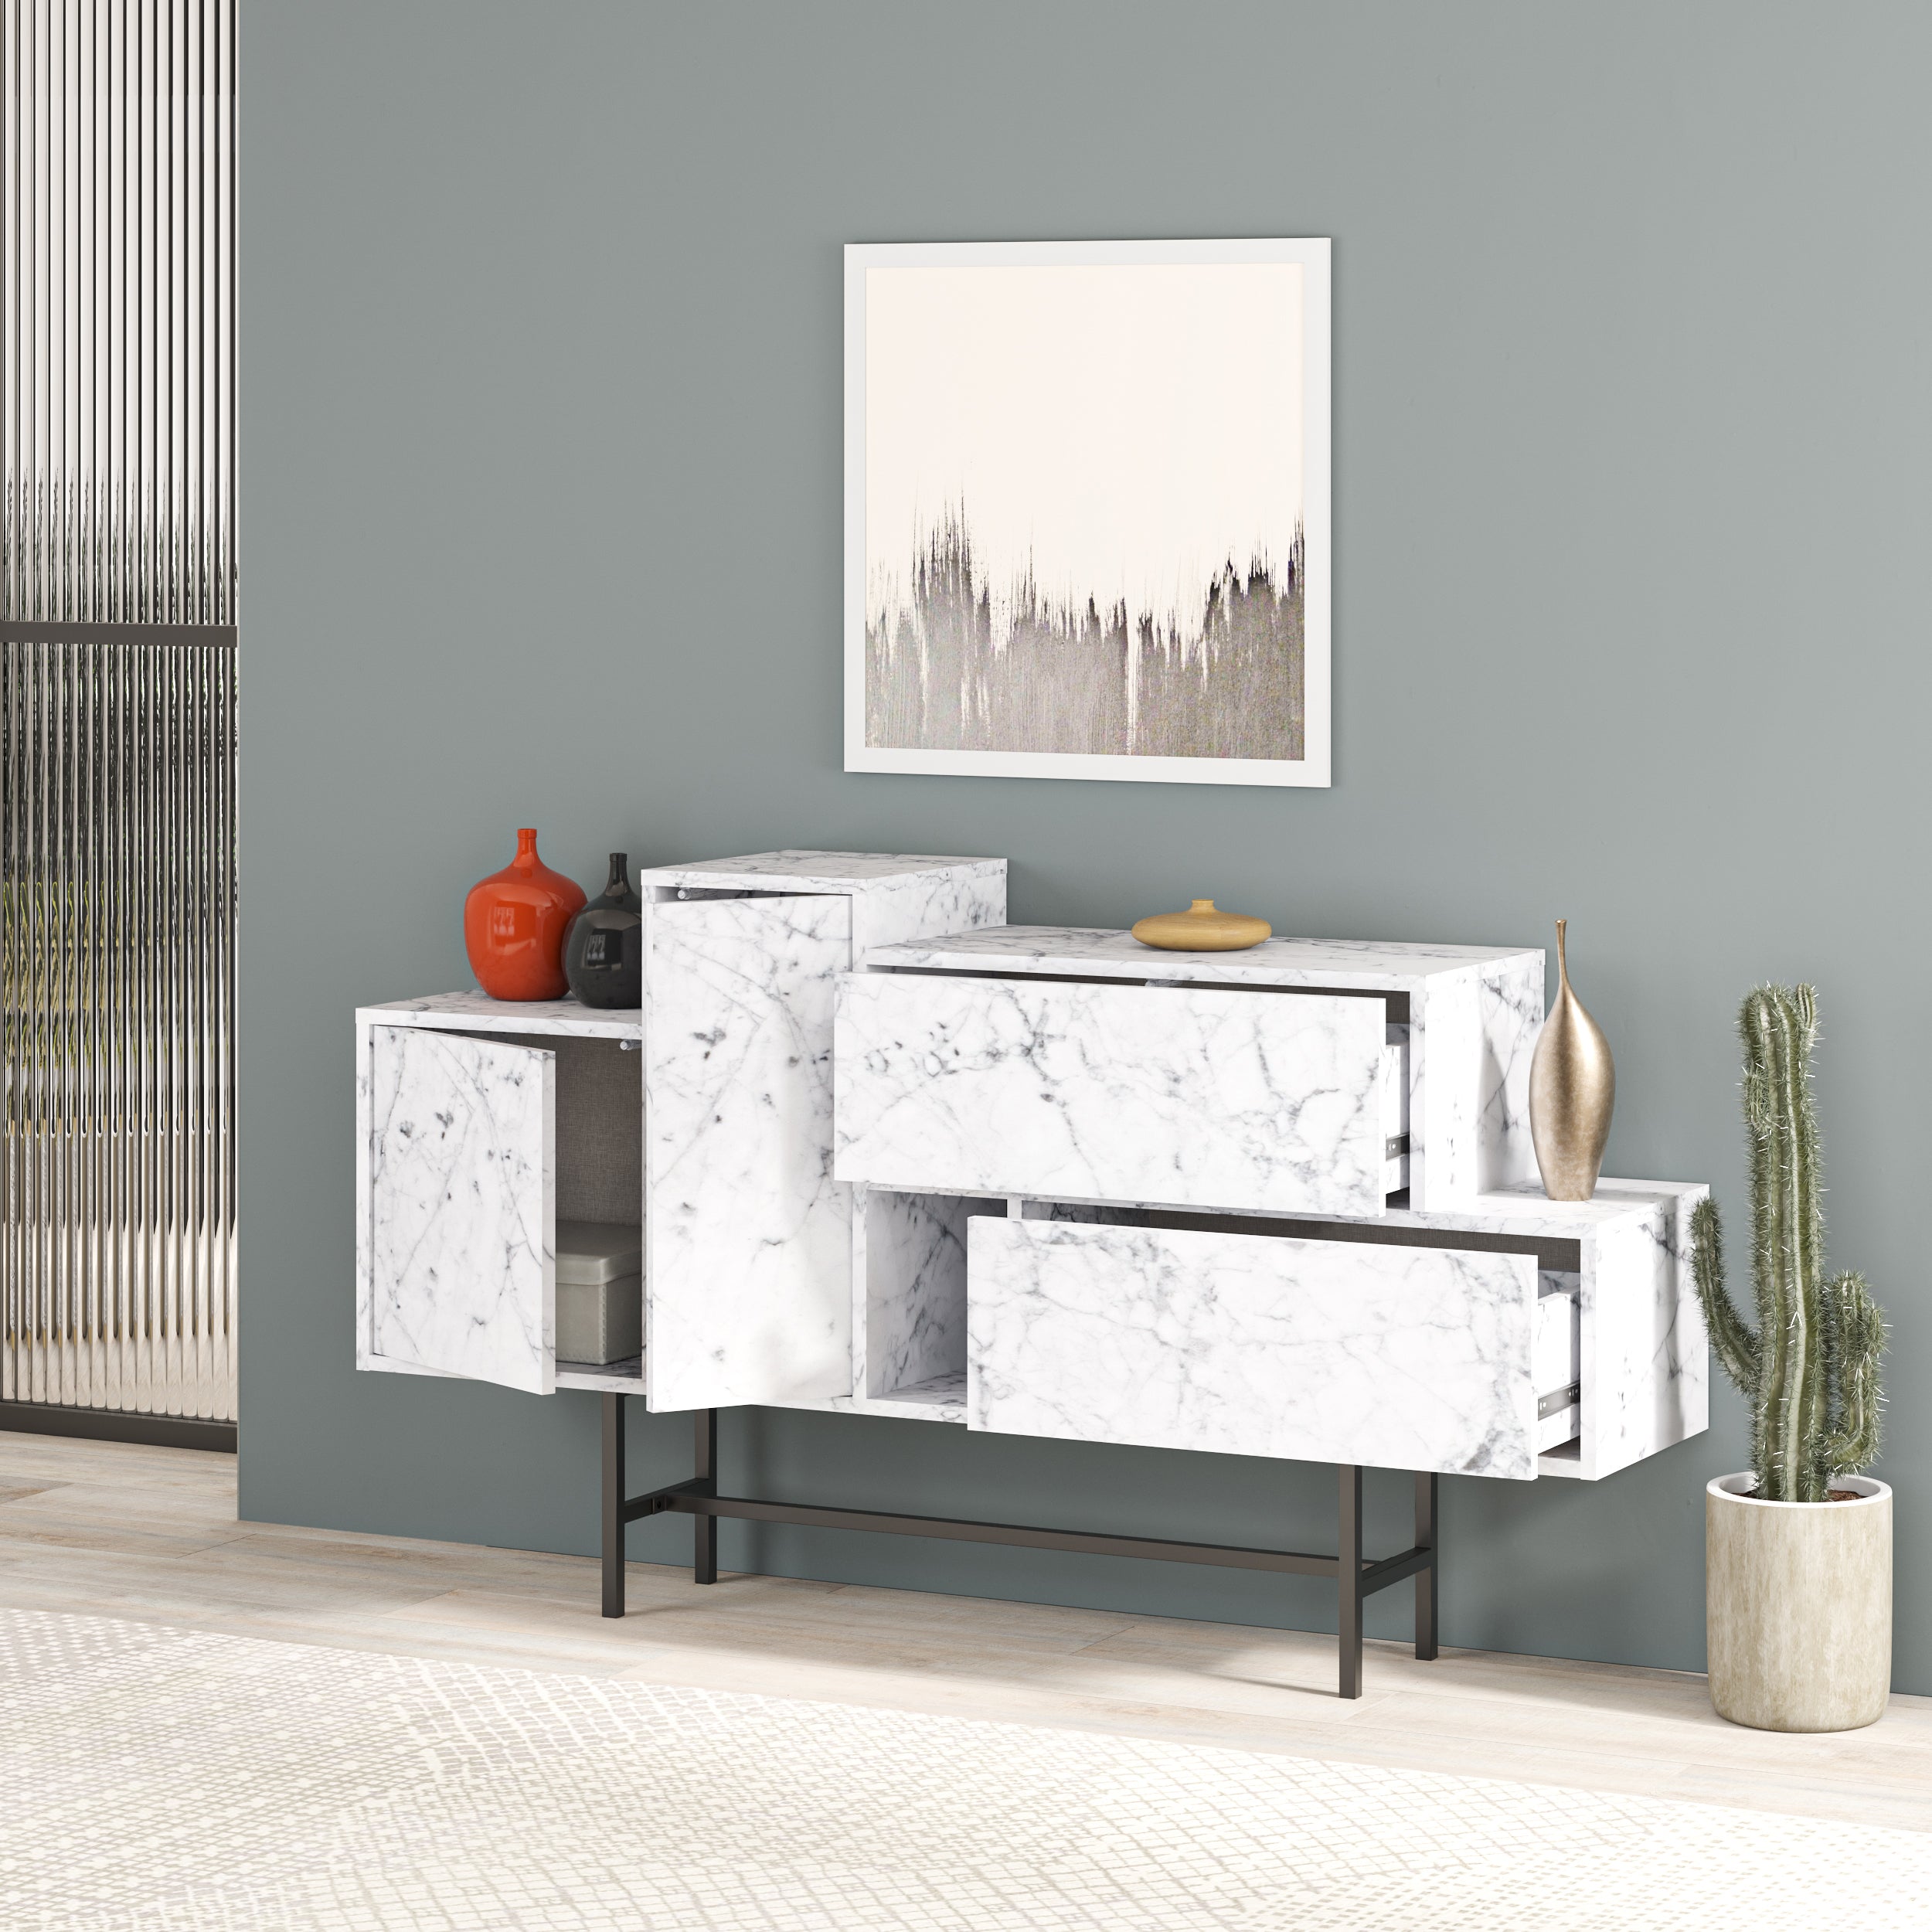 Hermes Console Sideboard Display Unit - Decortie